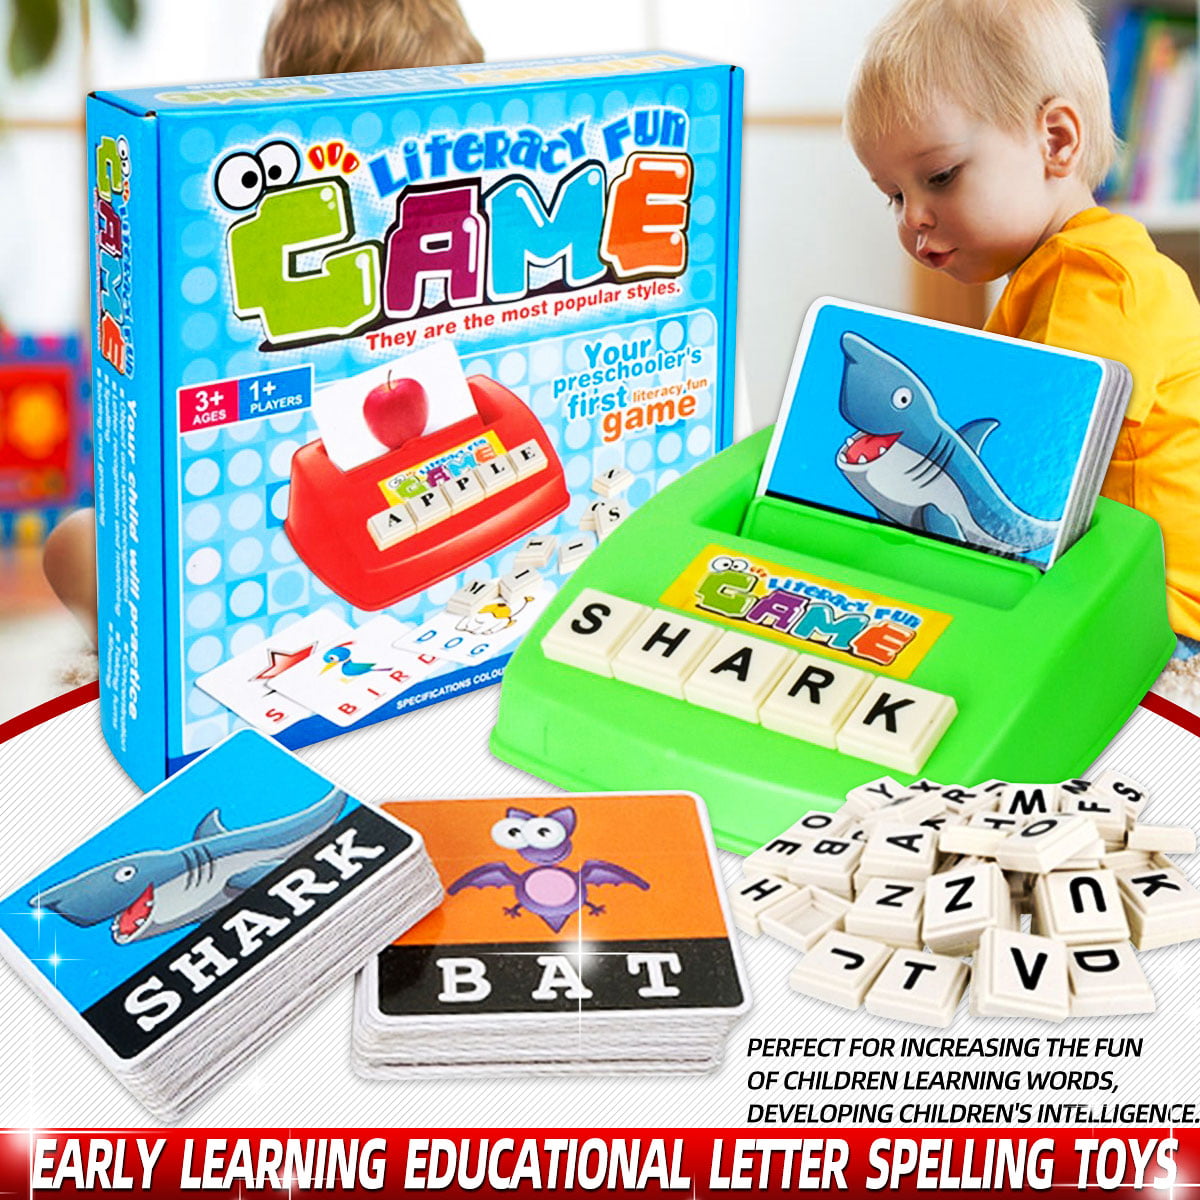 Spelling Words Matching Letter Puzzles Games Toys For Kids Toddlers Gifts 